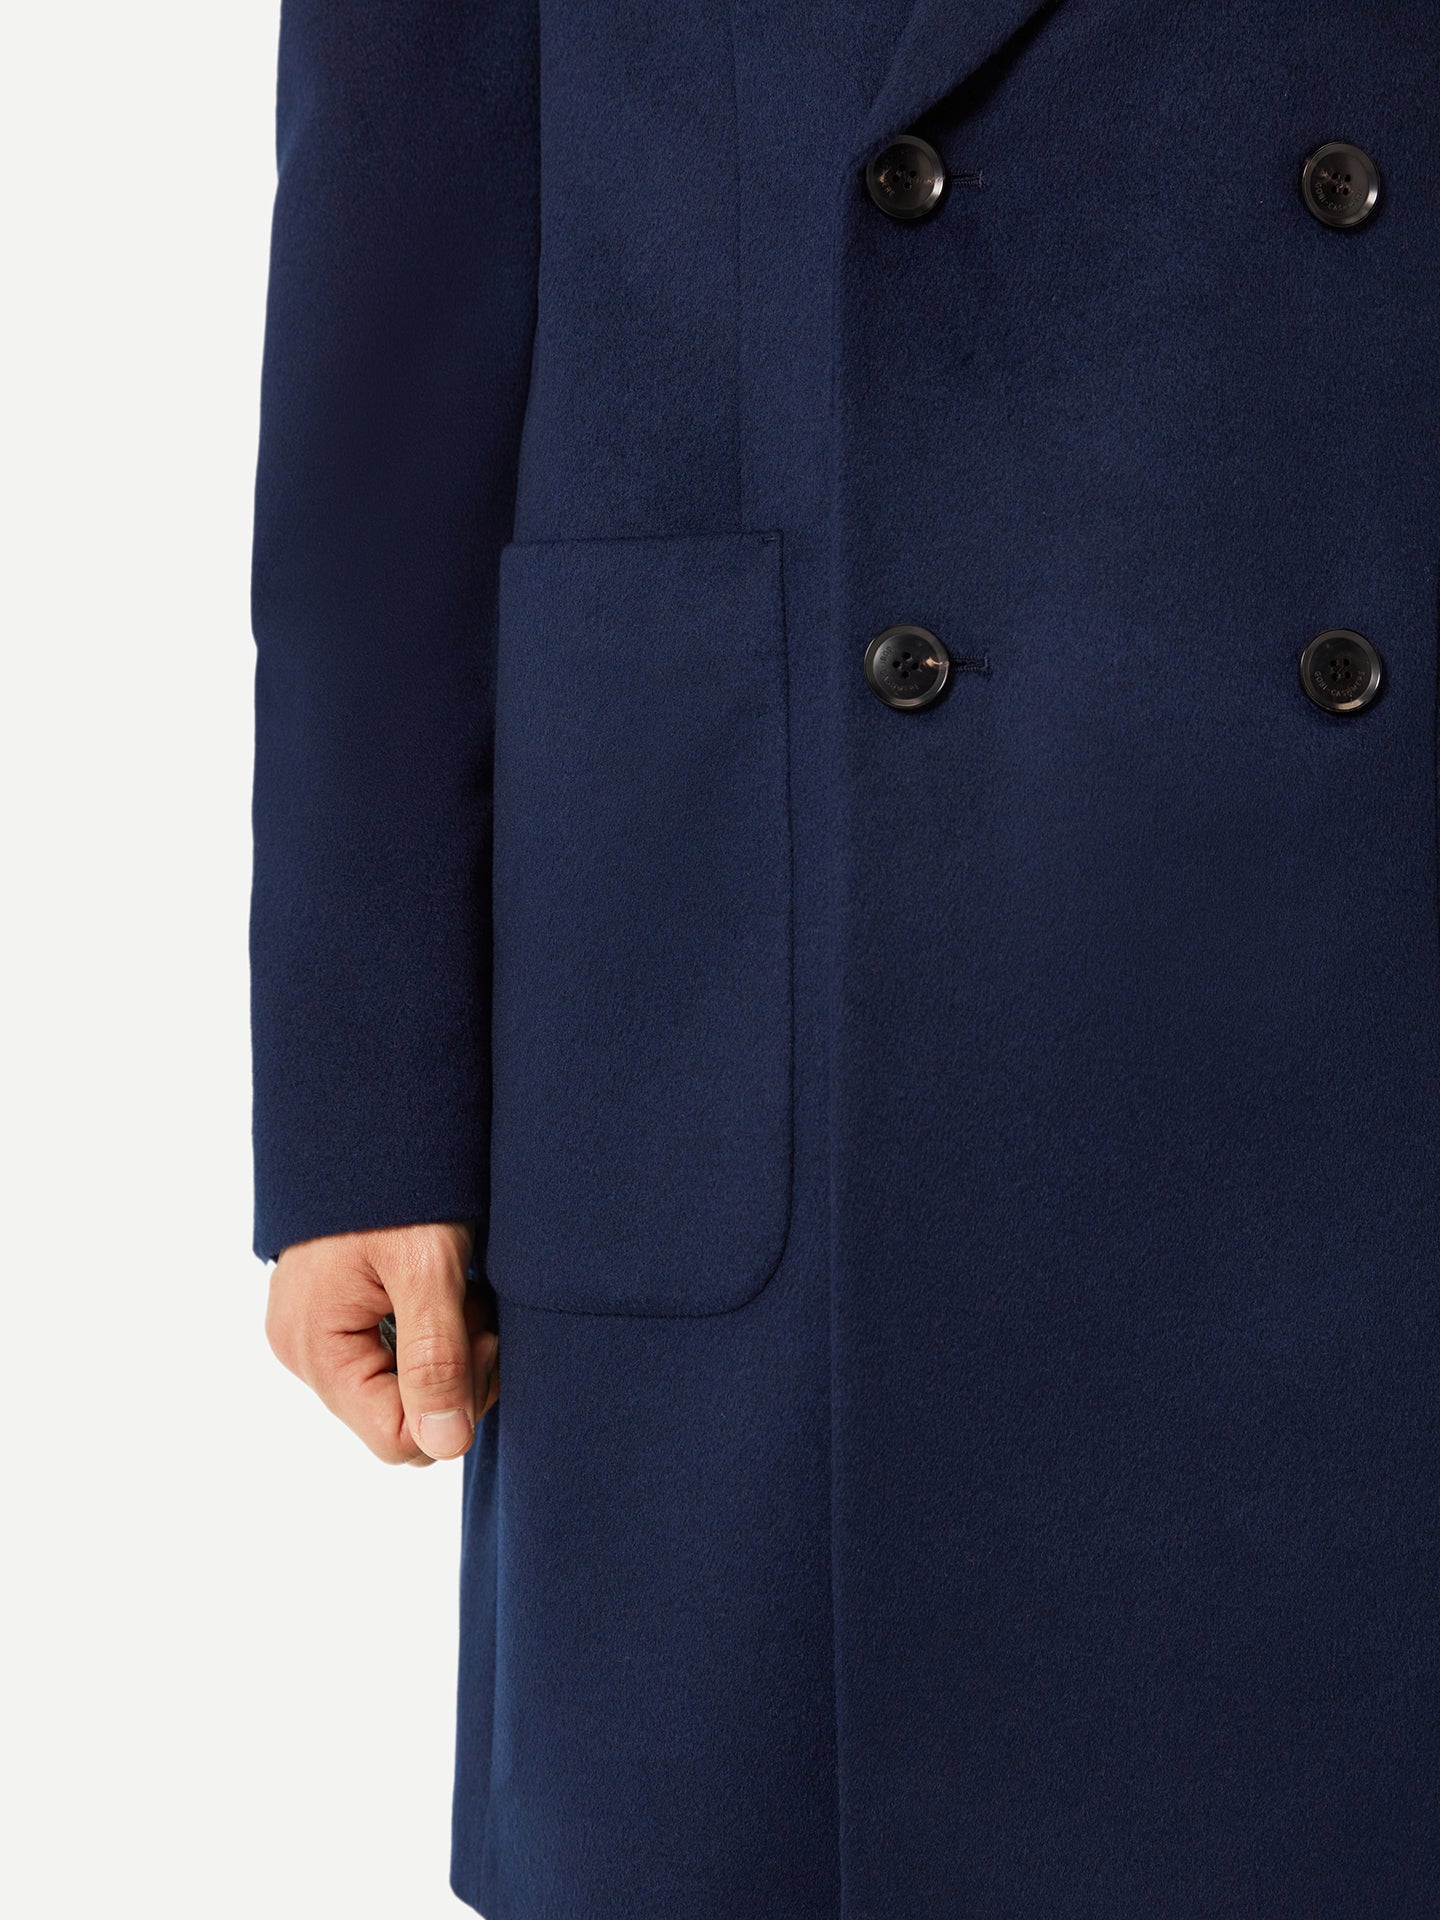 Men's Double-Breasted Cashmere Coat Navy - Gobi Cashmere